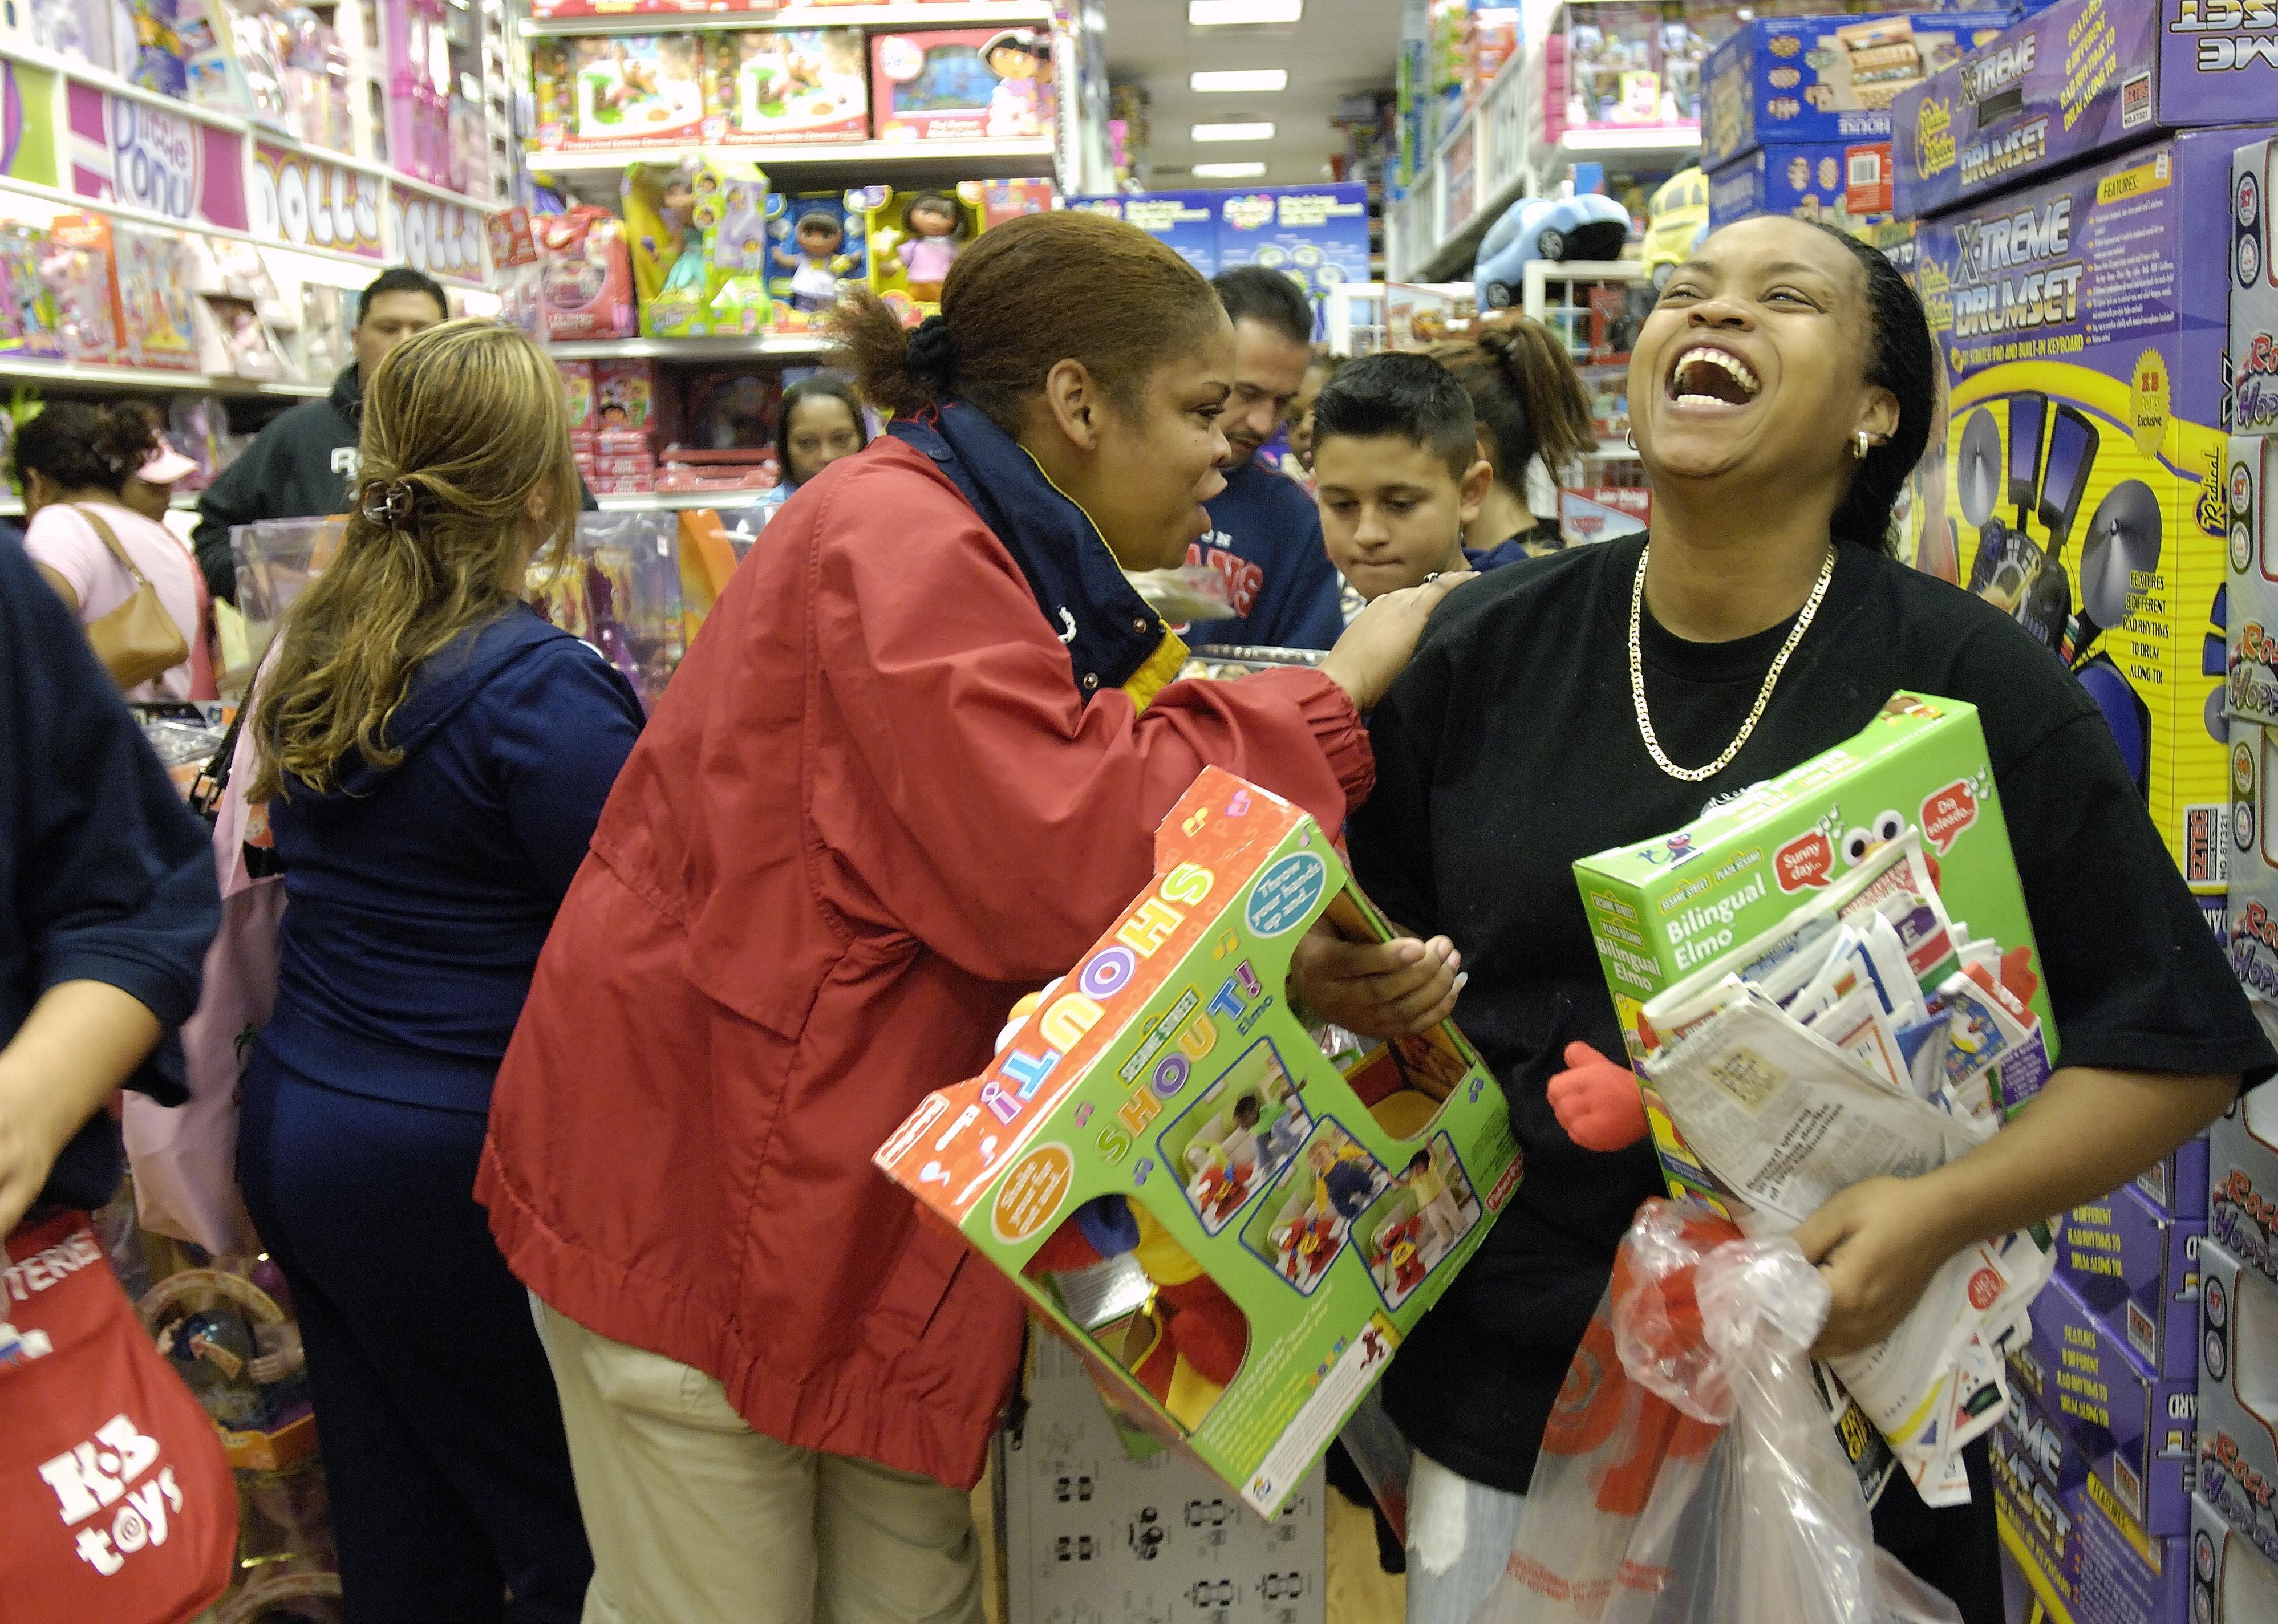 Two women laughing while holding toys in a crowded toy store.